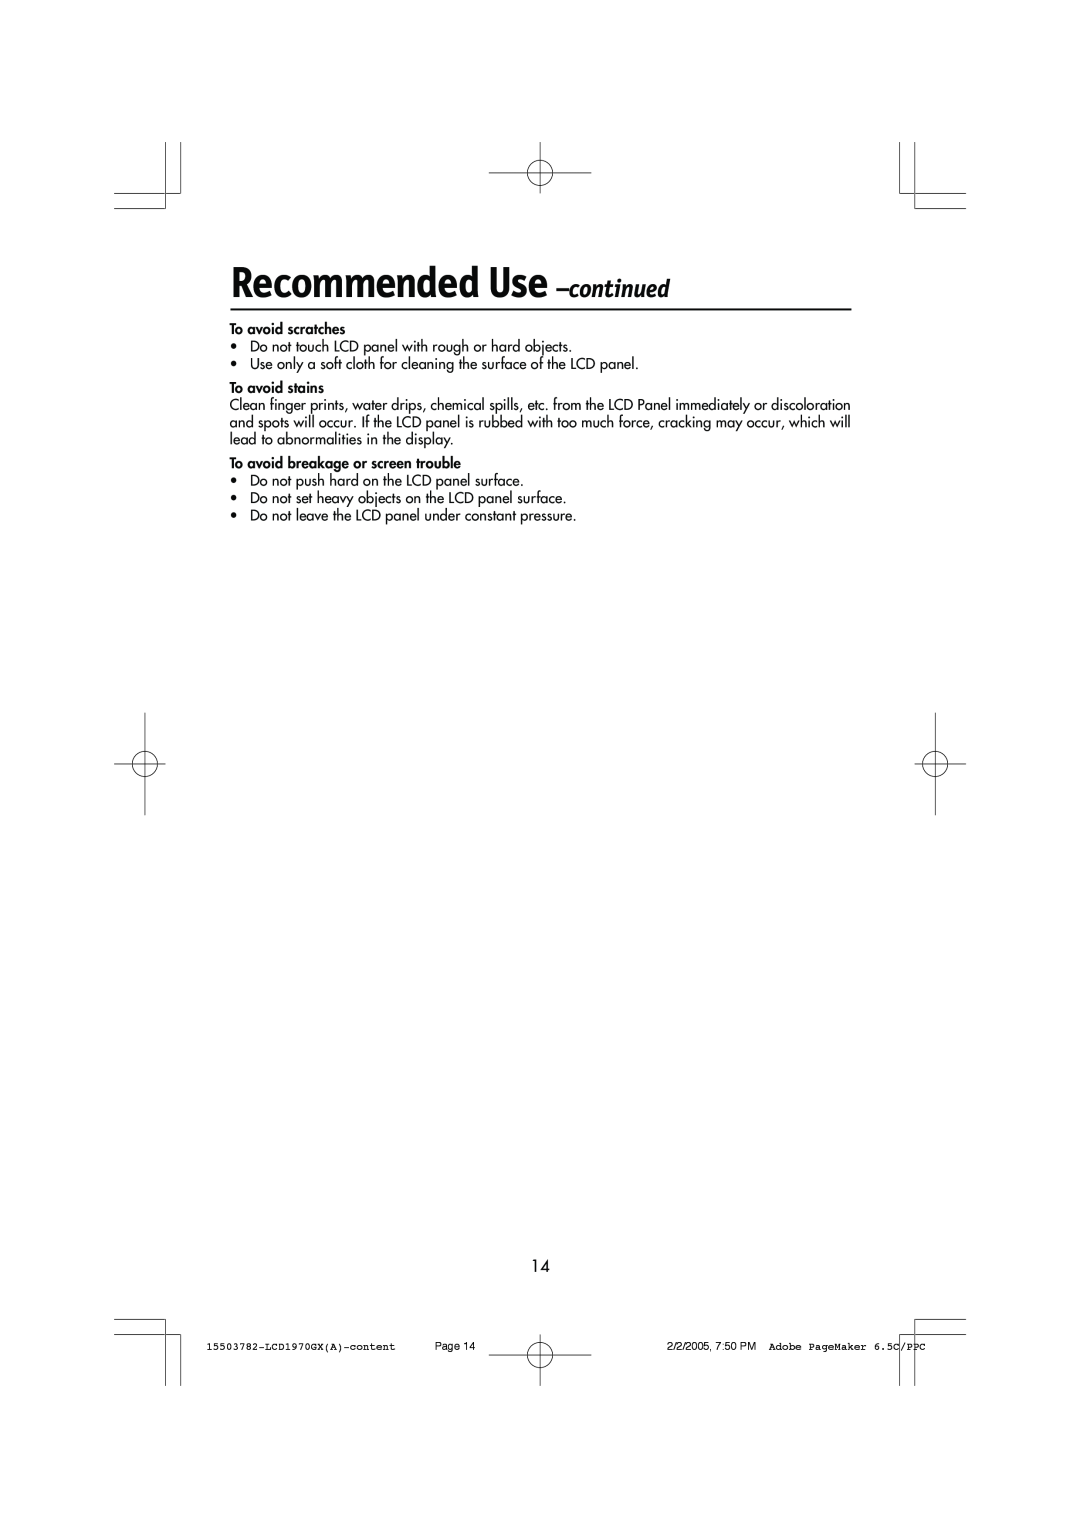 NEC LCD1970GX user manual Recommended Use -continued, To avoid scratches 